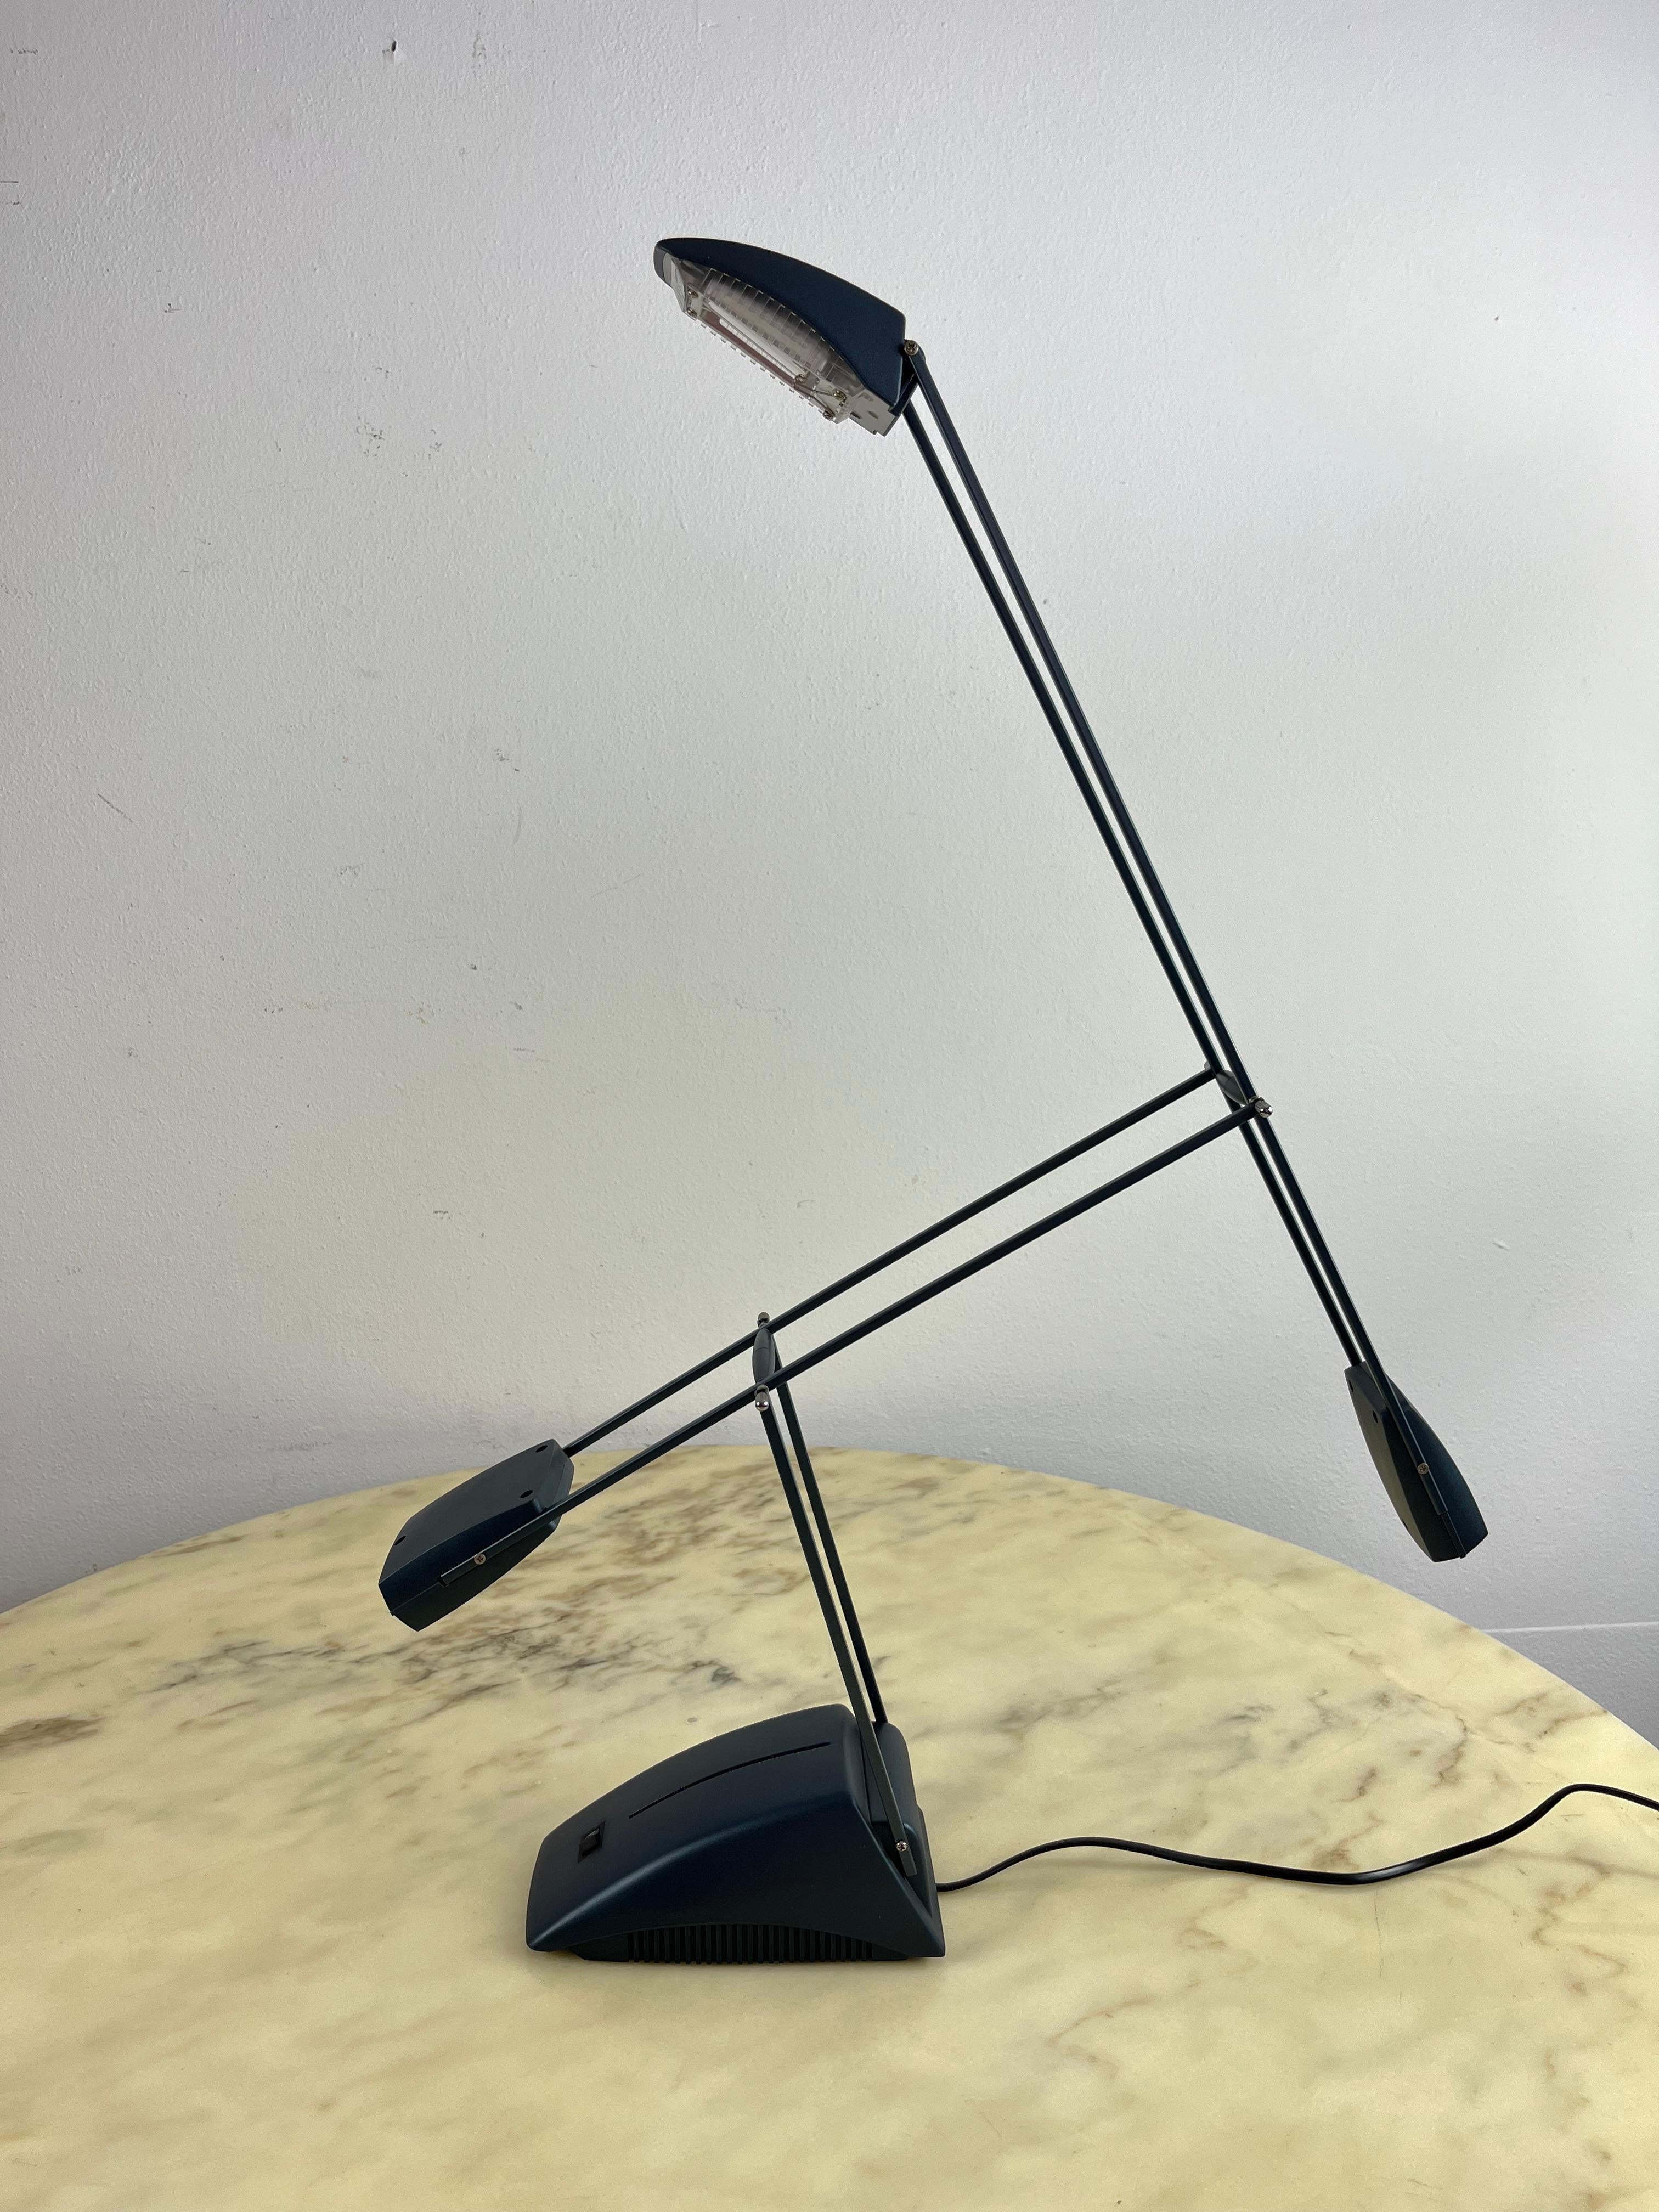 Articulated table lamp with halogen light  1970s
Integral and functioning with dual lighting modes. Good condition, small signs of aging.